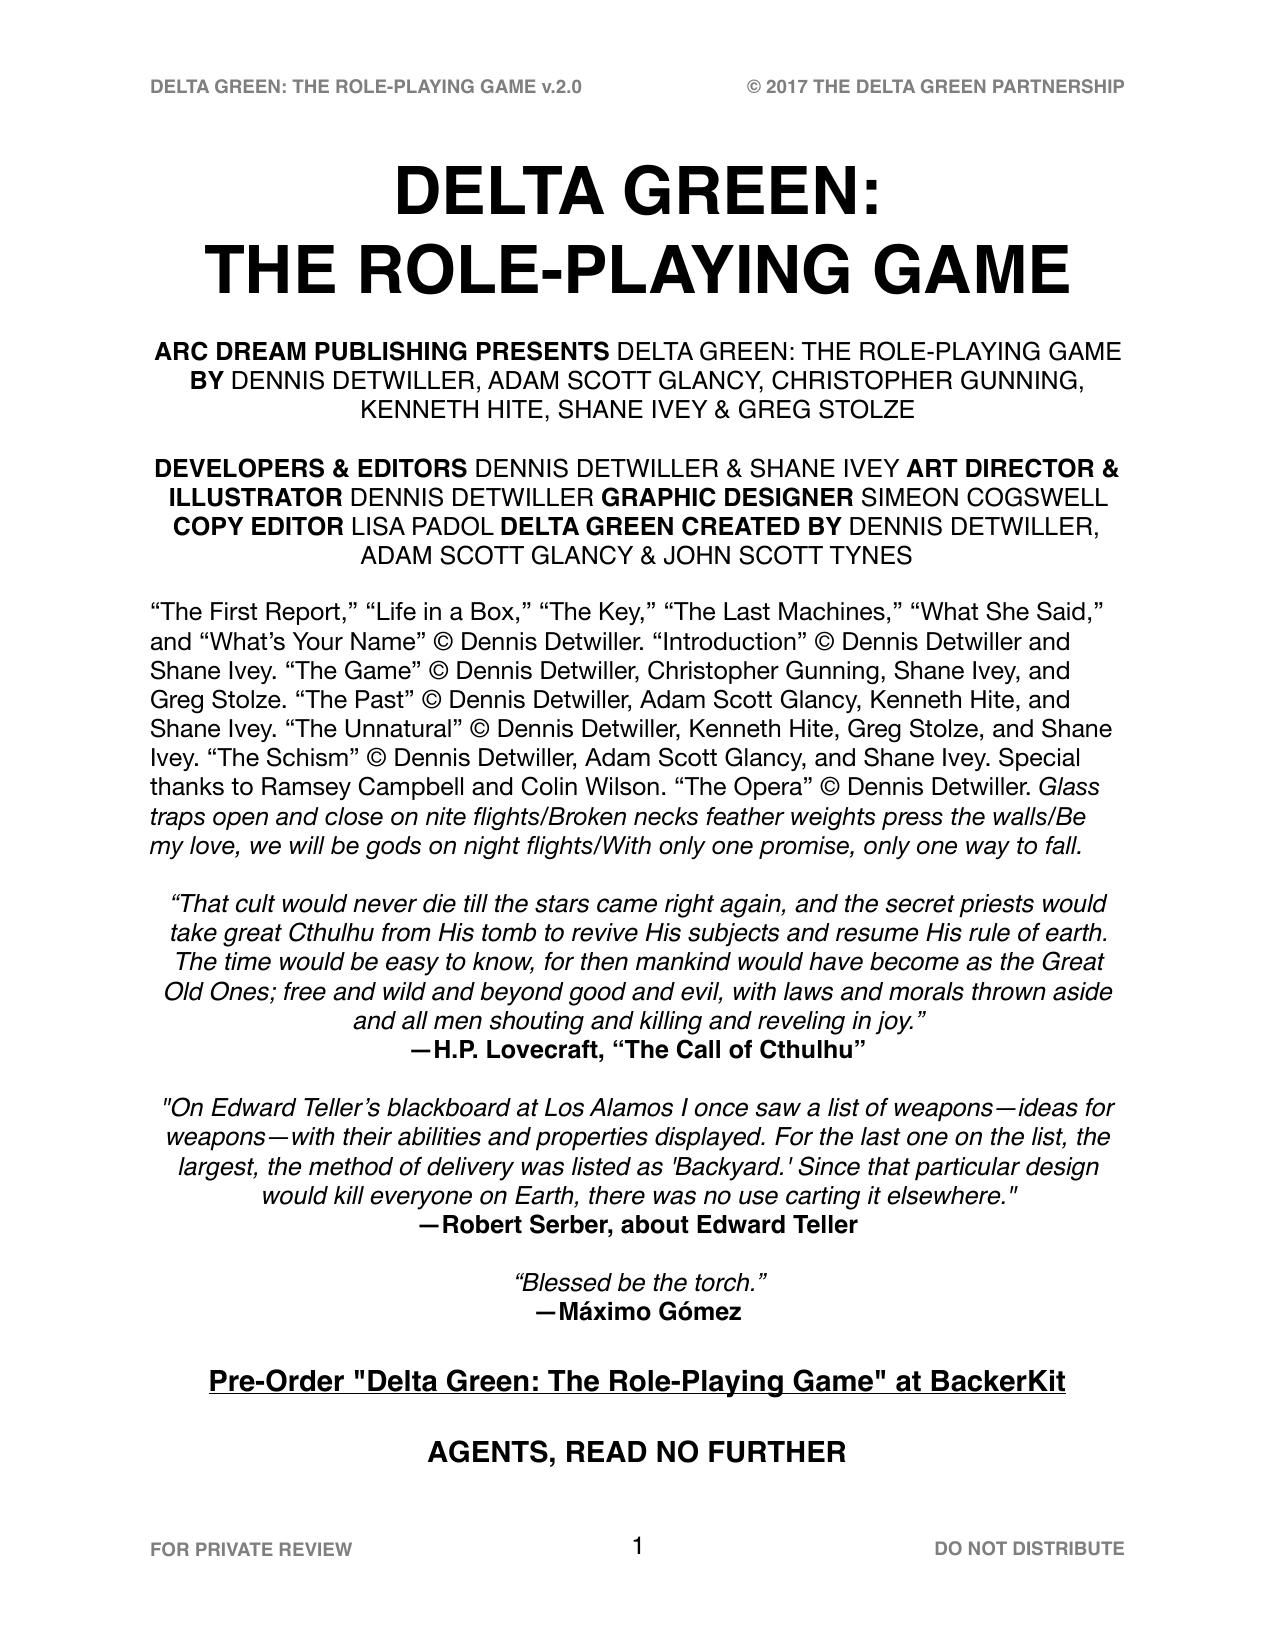 DELTA GREEN THE ROLEPLAYING GAME INTEGRATED